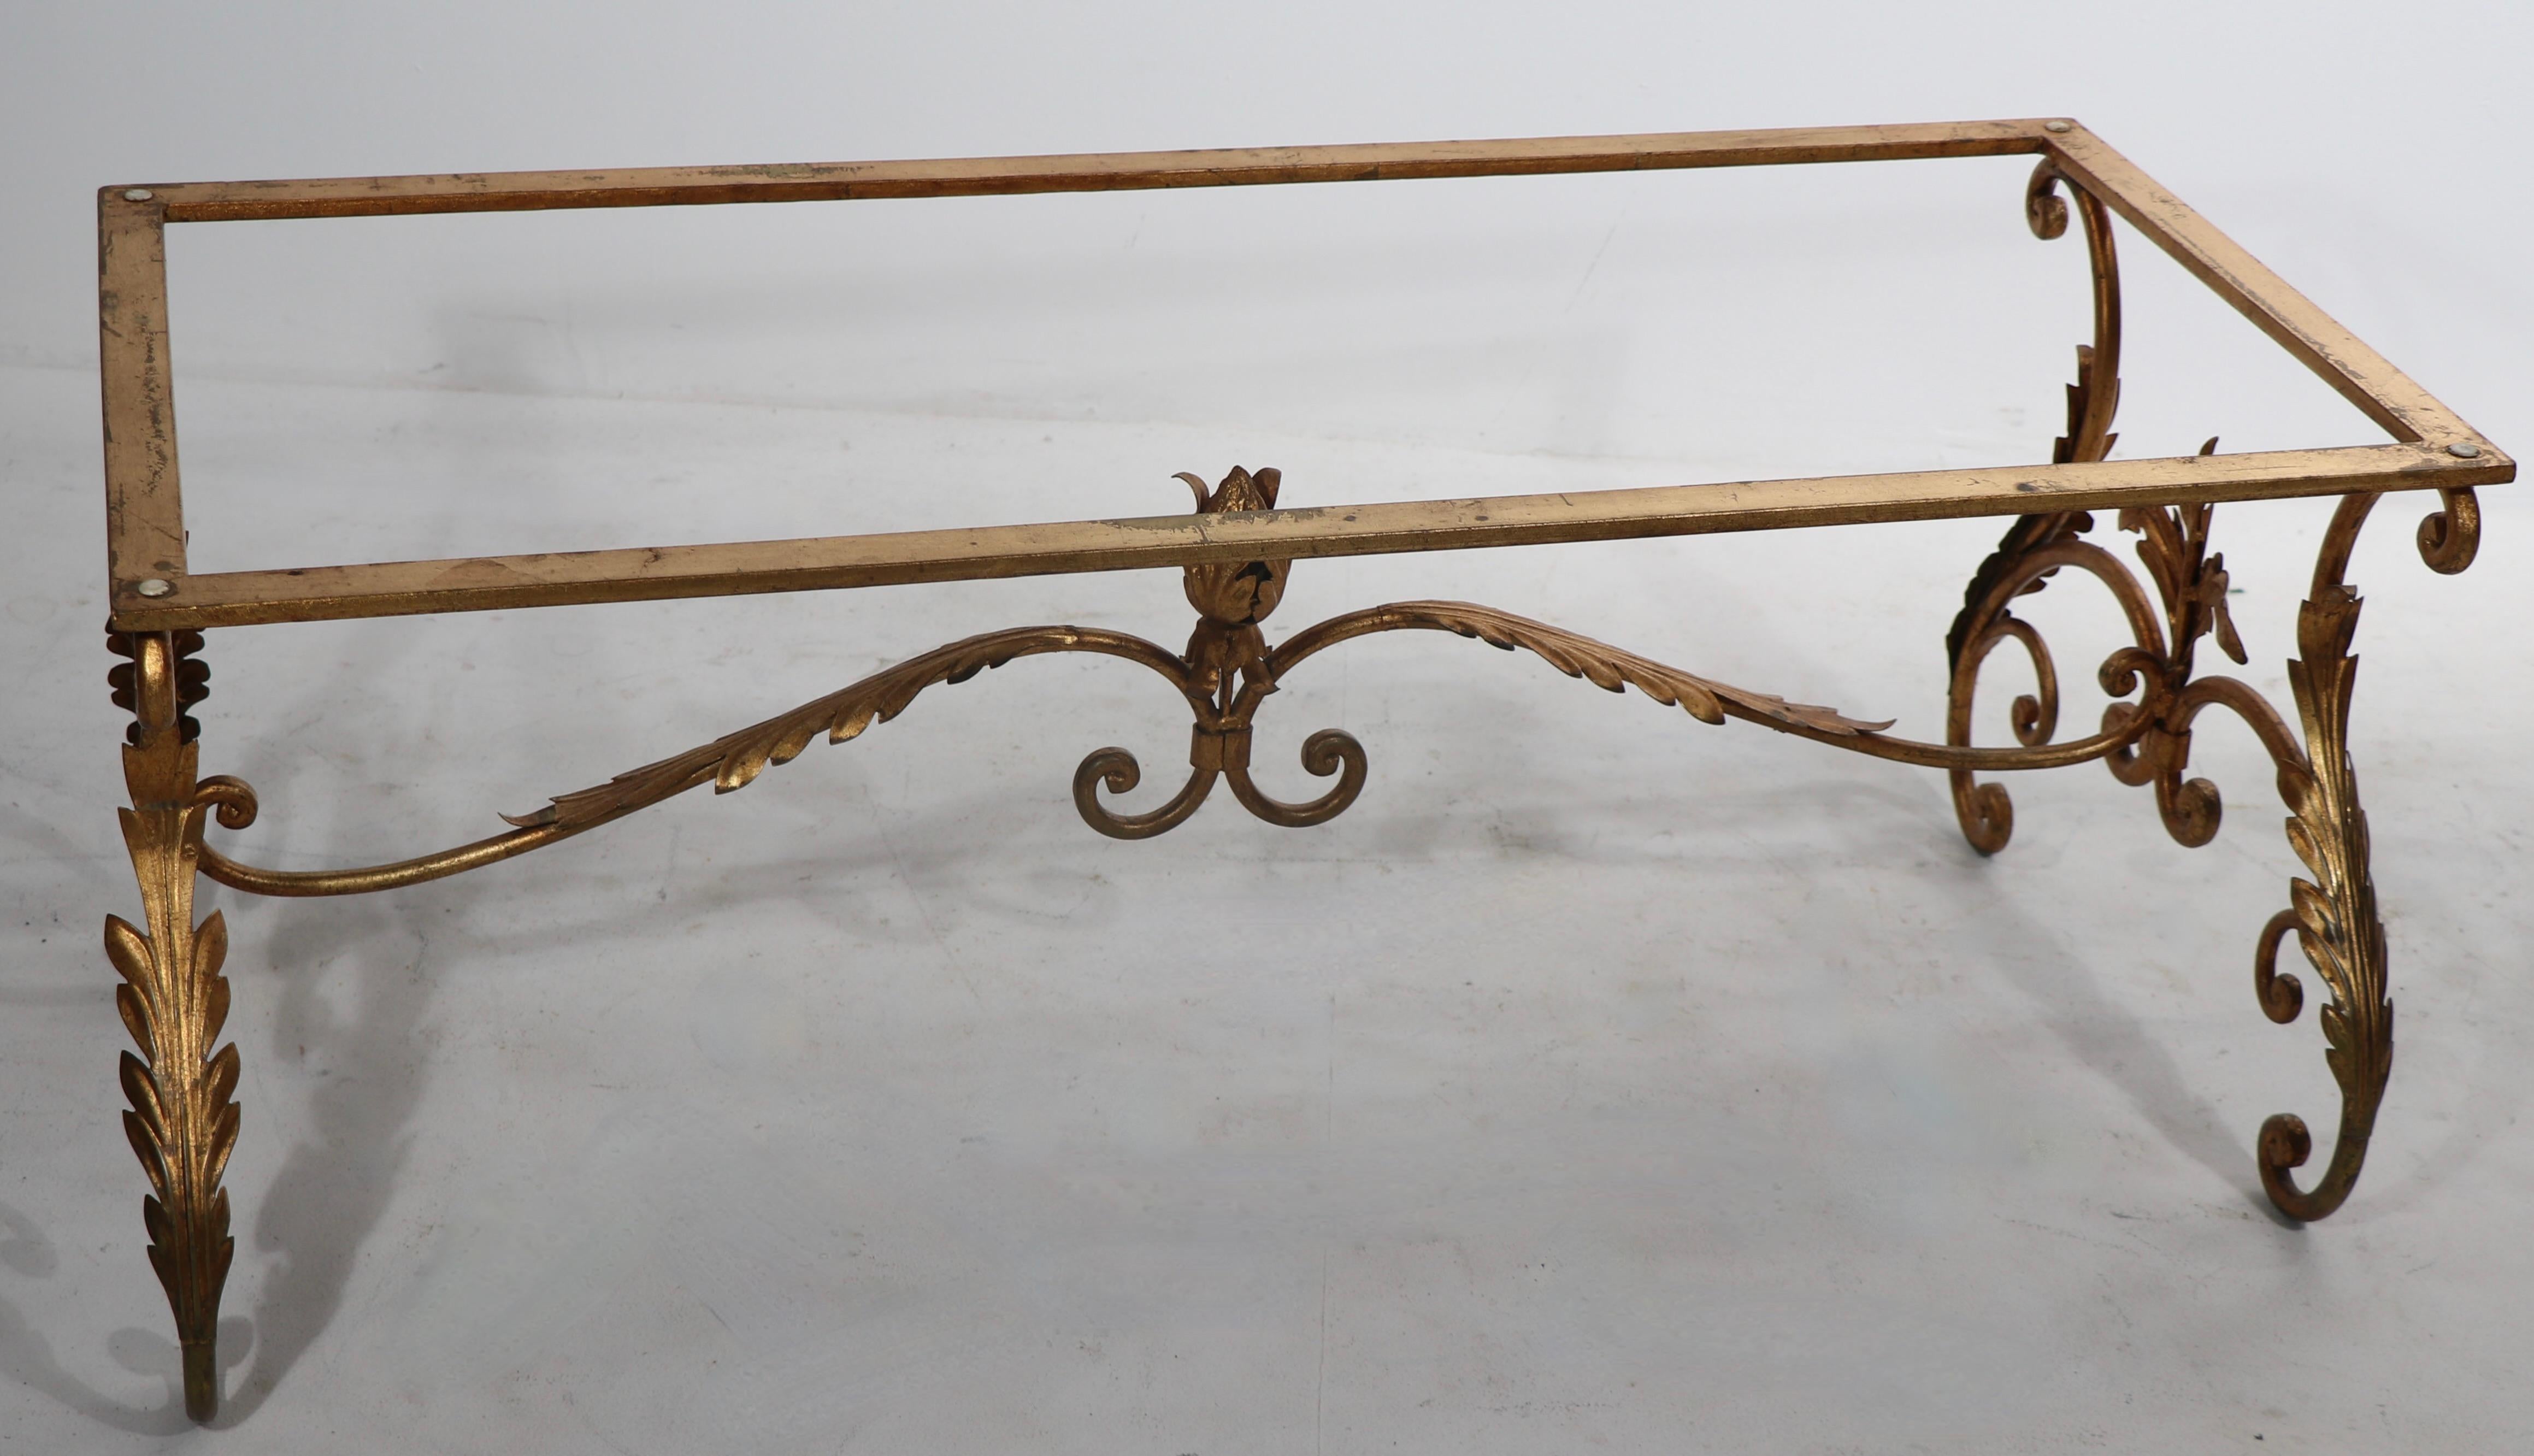 Nice ornate gilt wrought iron coffee table base, in the classical style, probably made in Spain, Circa 1940/1960's. The base is in very good original condition, missing the top, easily replaced with either glass, marble, stone etc.